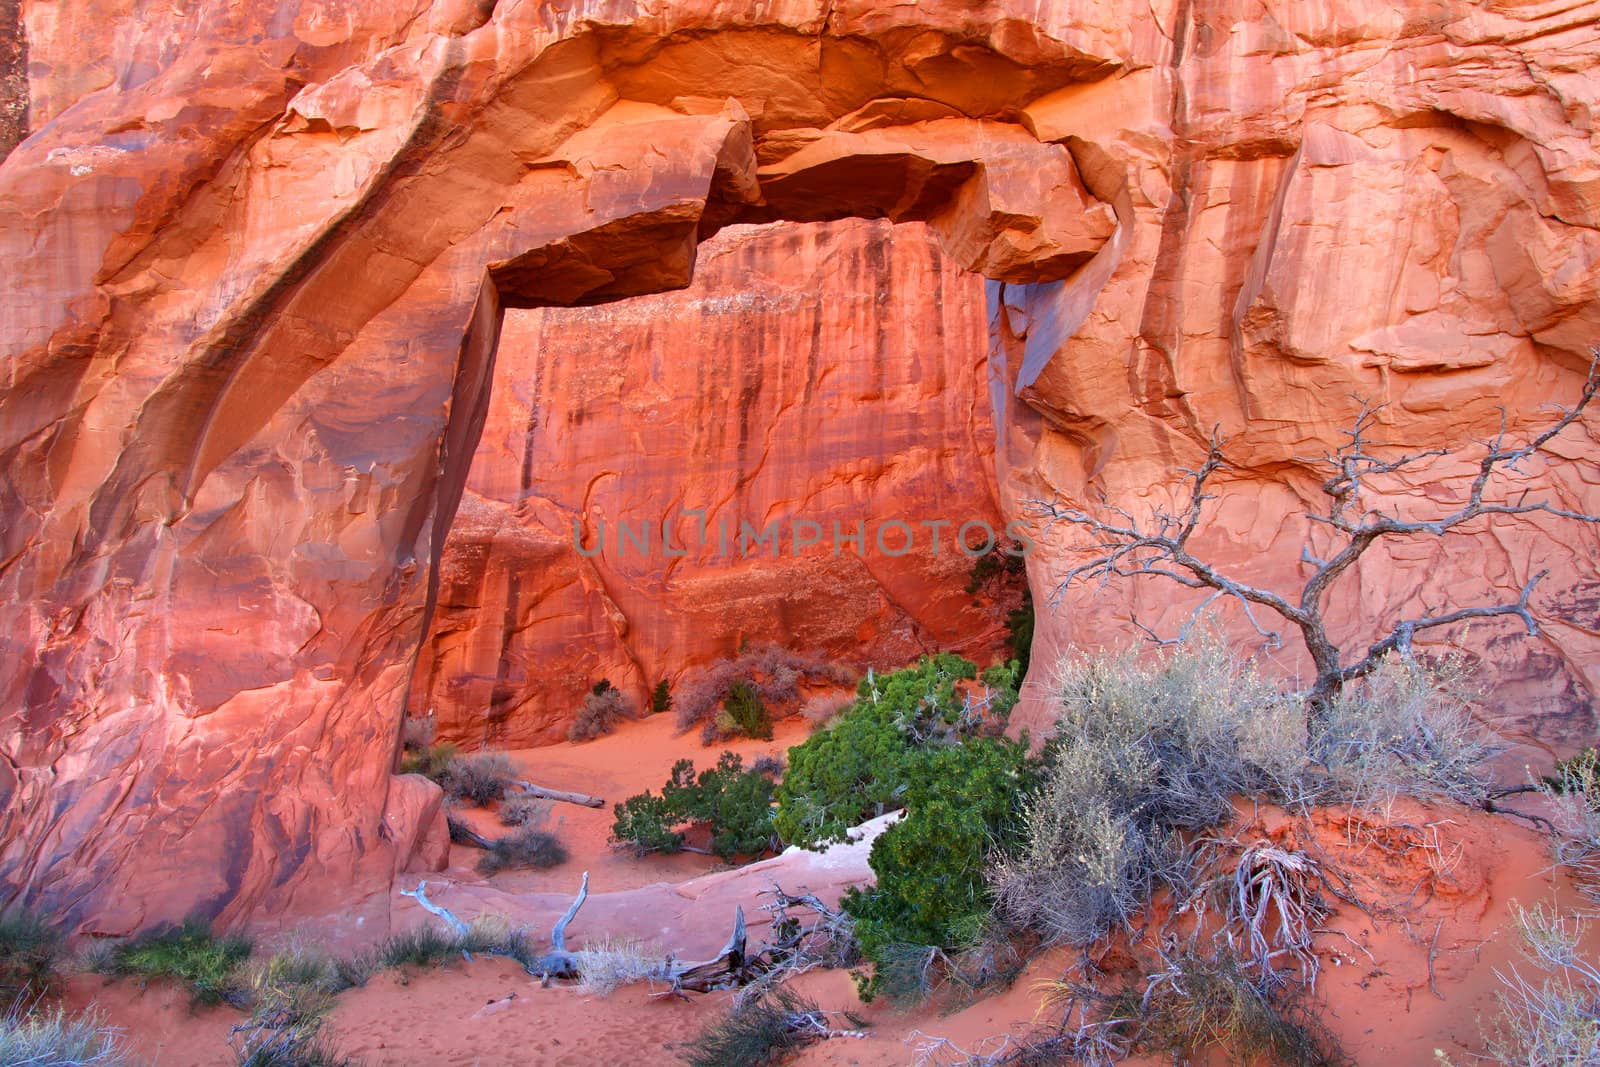 View of Pine Tree Arch in Arches National Park of Utah.